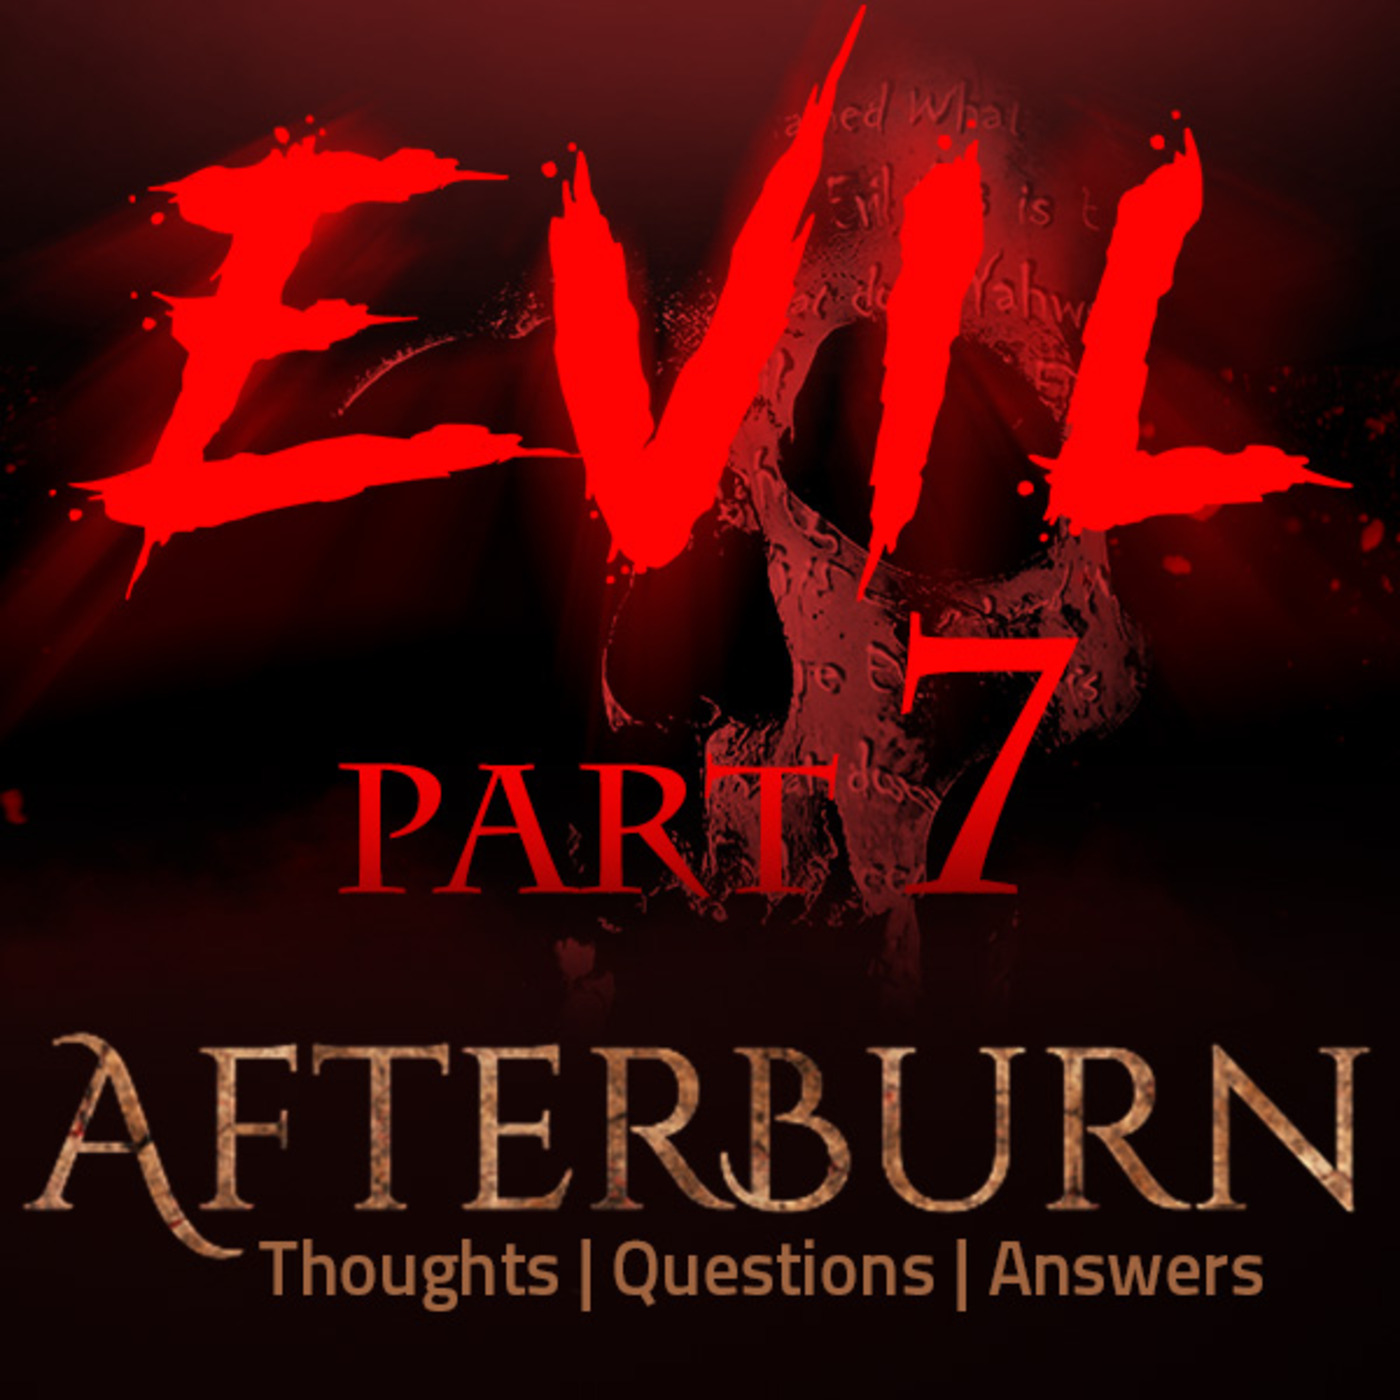 Episode 716: Afterburn | Thoughts, Q&A on Evil | Part 7